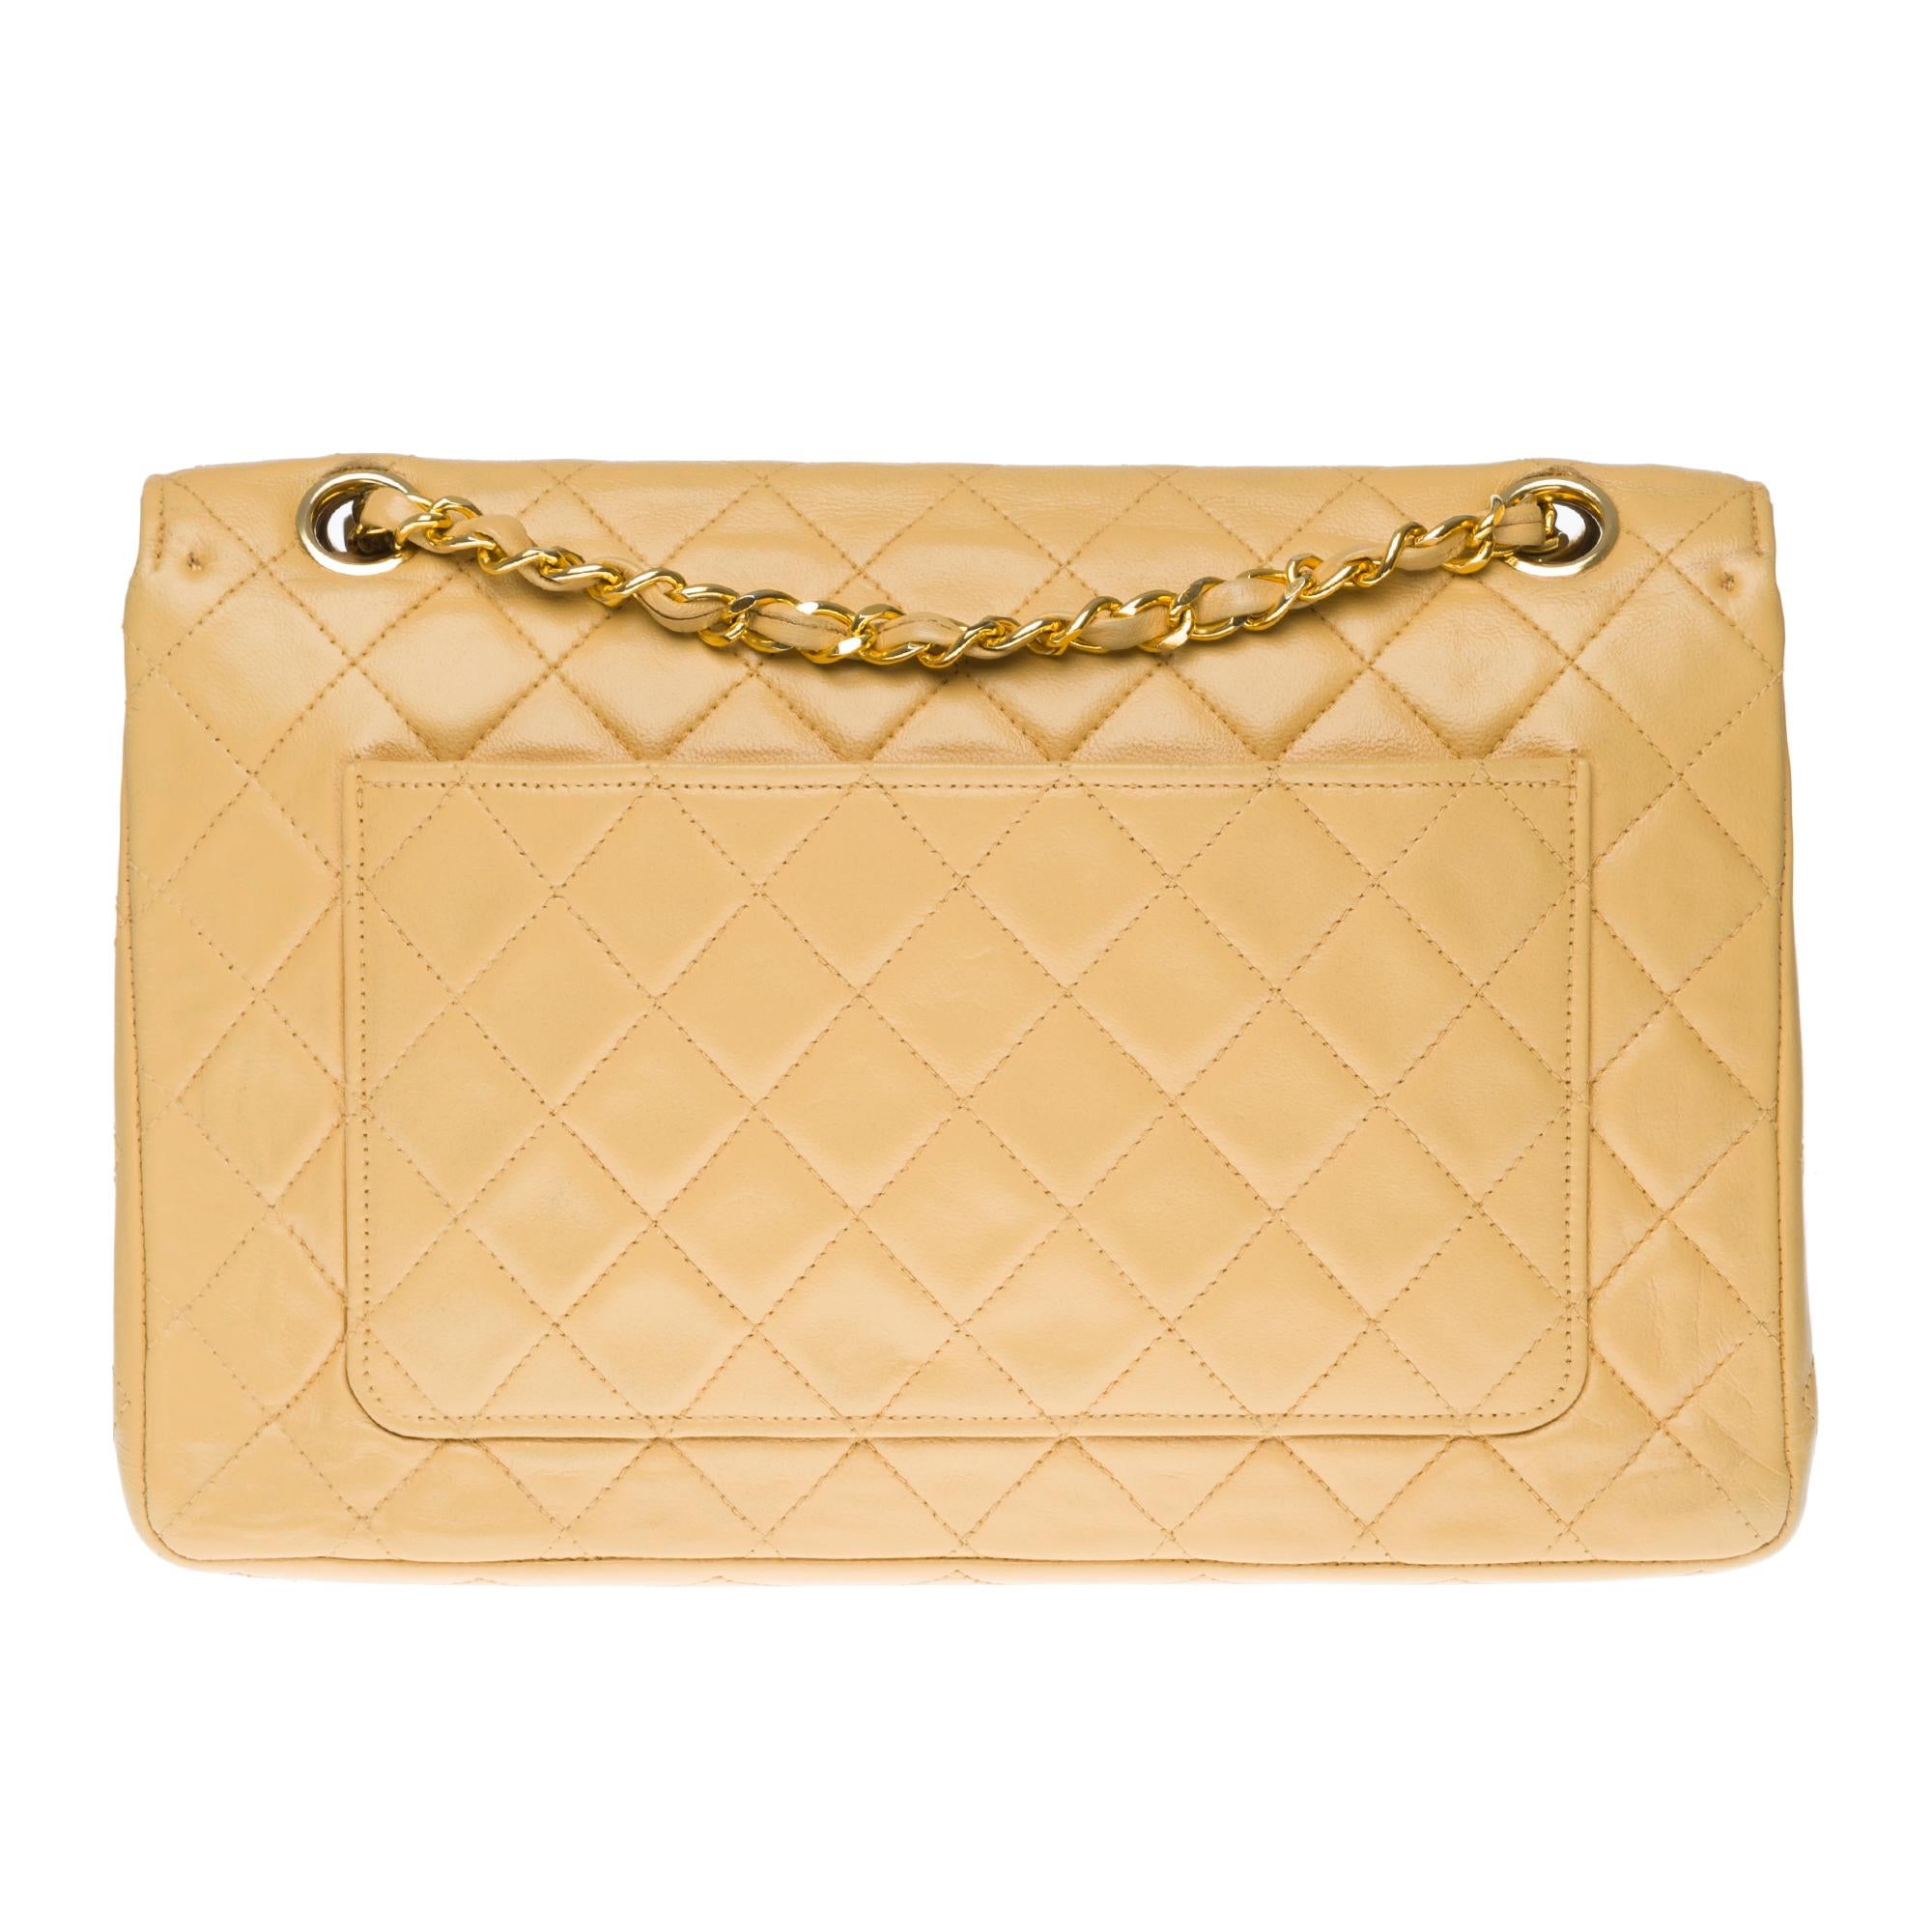 Lovely Chanel Classique 25cm bag with flap in beige quilted lambskin leather, edging in coral leather on flap, gold metal hardware, golden metal chain interwoven with beige leather.
Flap closure, gold-tone CC symbol.
Lining in beige leather, 1